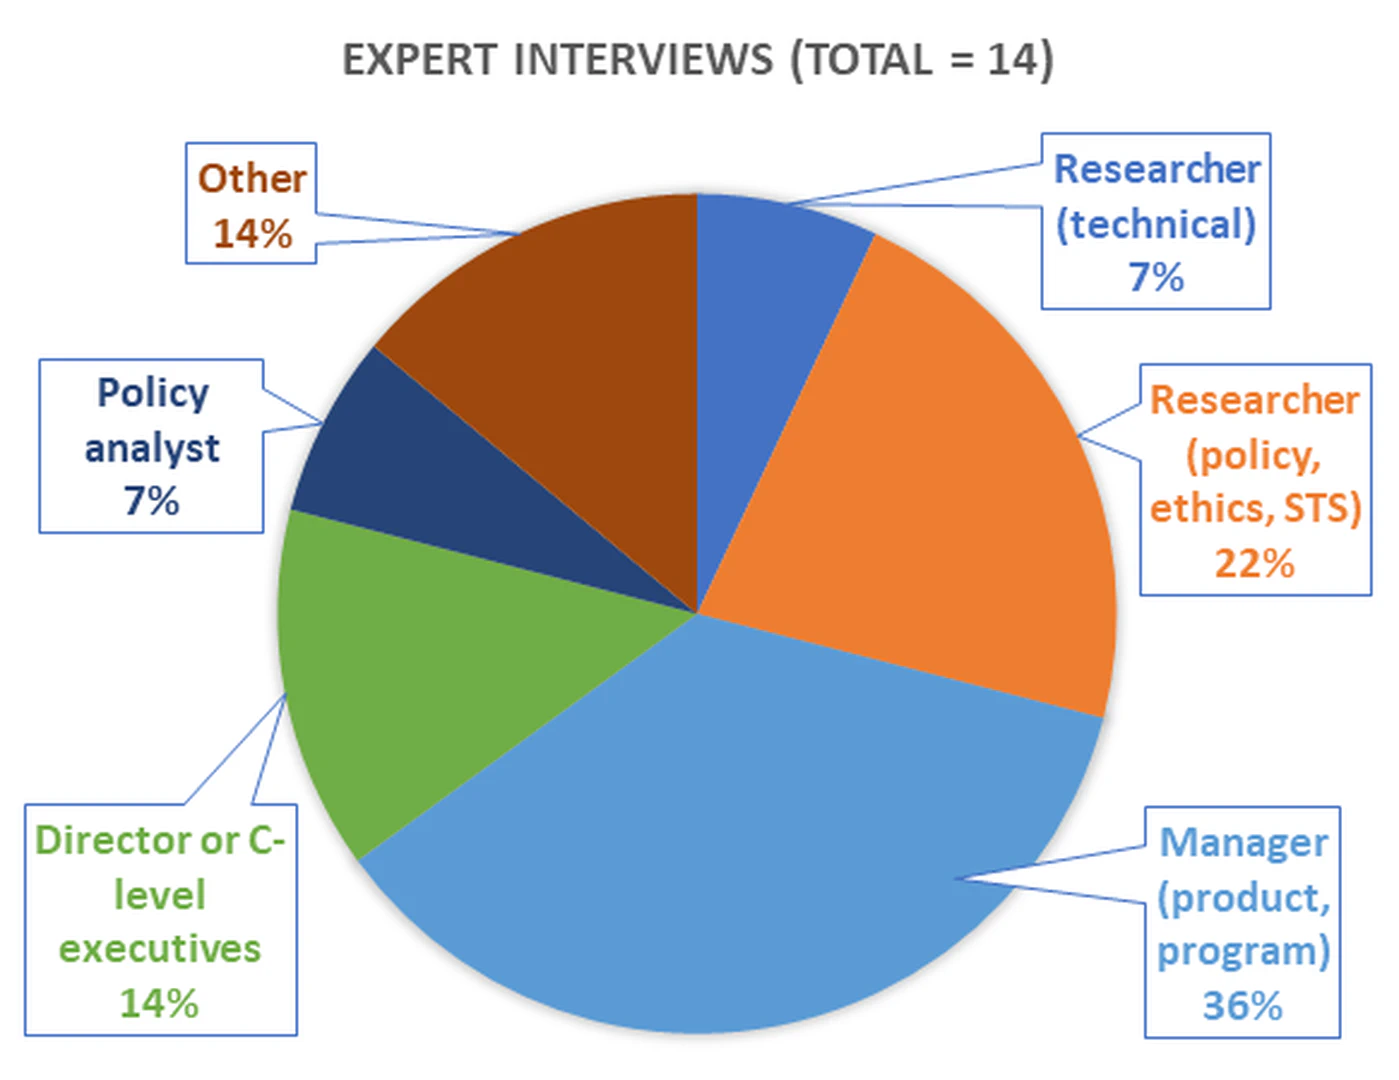 Distribution of occupations represented in the interviews